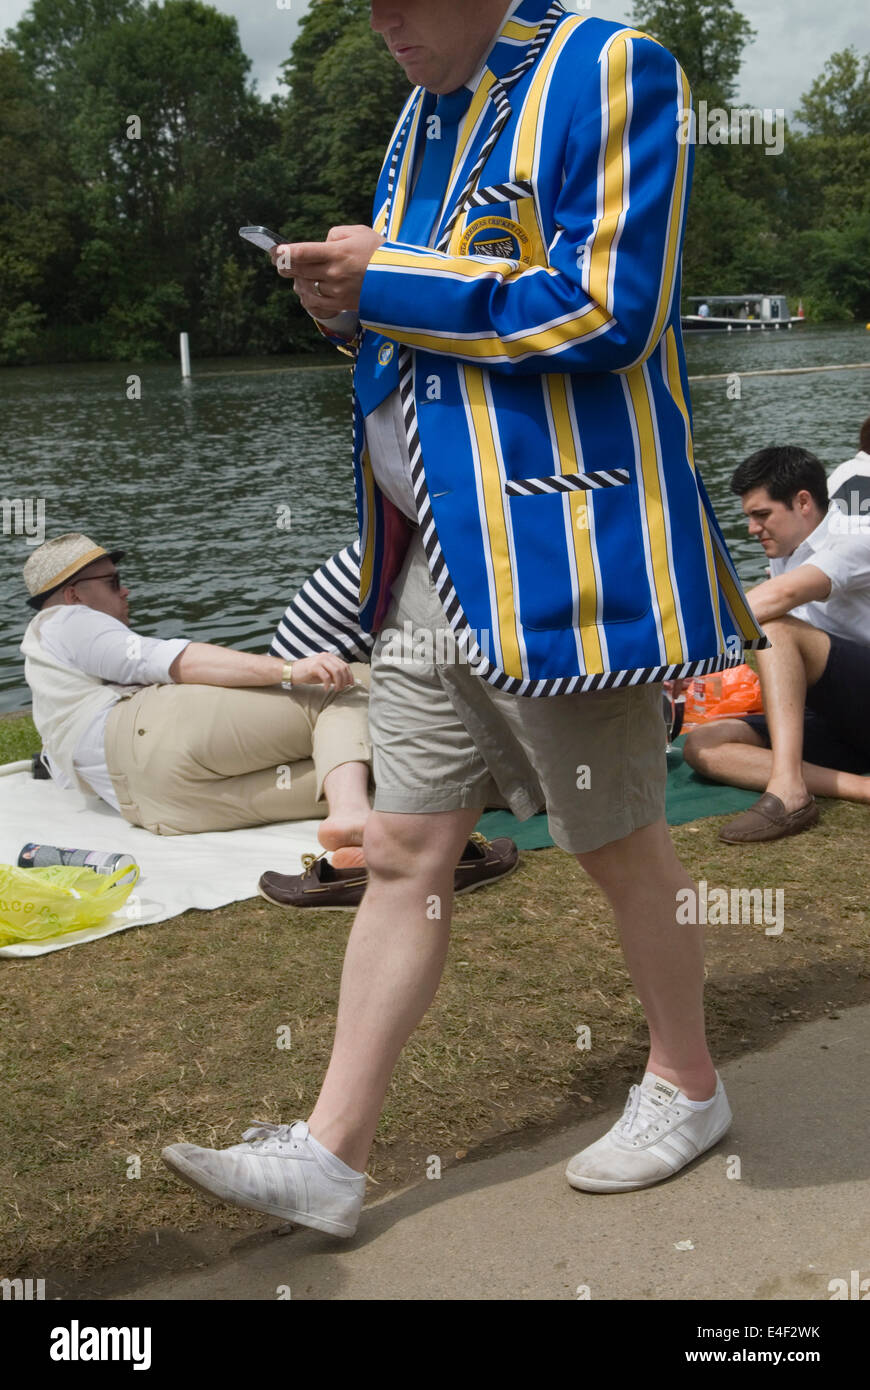 English man wearing shorts a shirt and tie fashion victim  and rowing club blazer. 22010s. UK. Henley Royal Regatta he is using a mobile devise iphone. 2014 Henley on Thames  Berkshire, England. HOMER SYKES Stock Photo